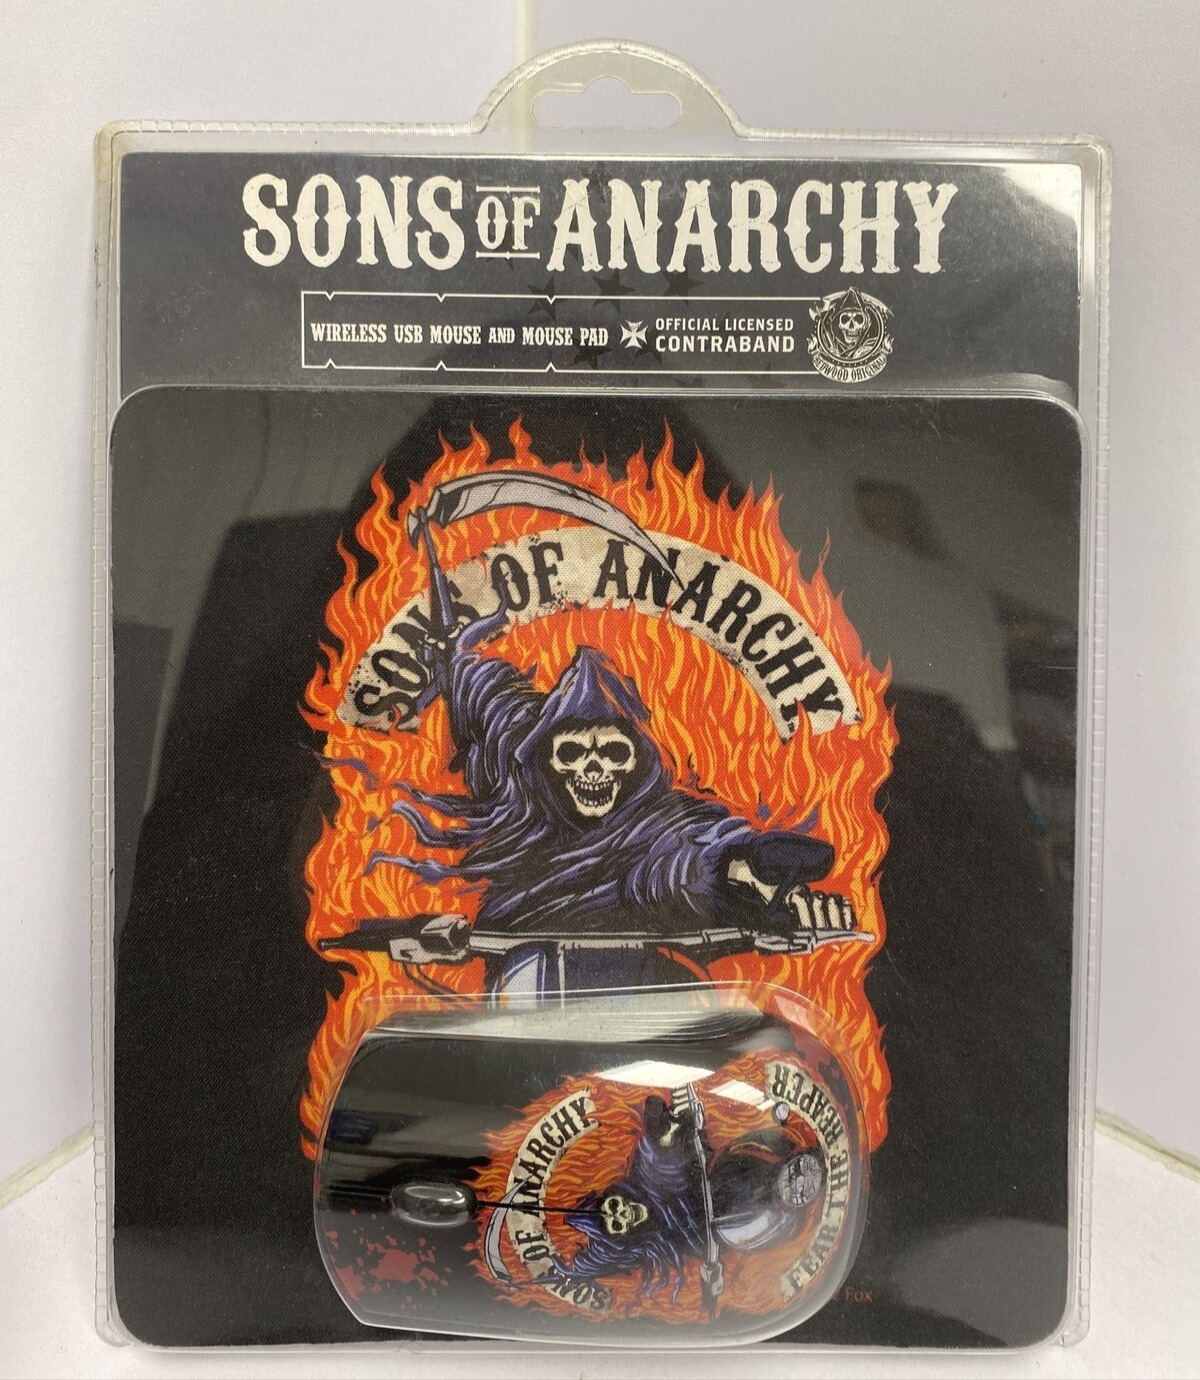 Sons of Anarchy Mouse & Mouse Pad